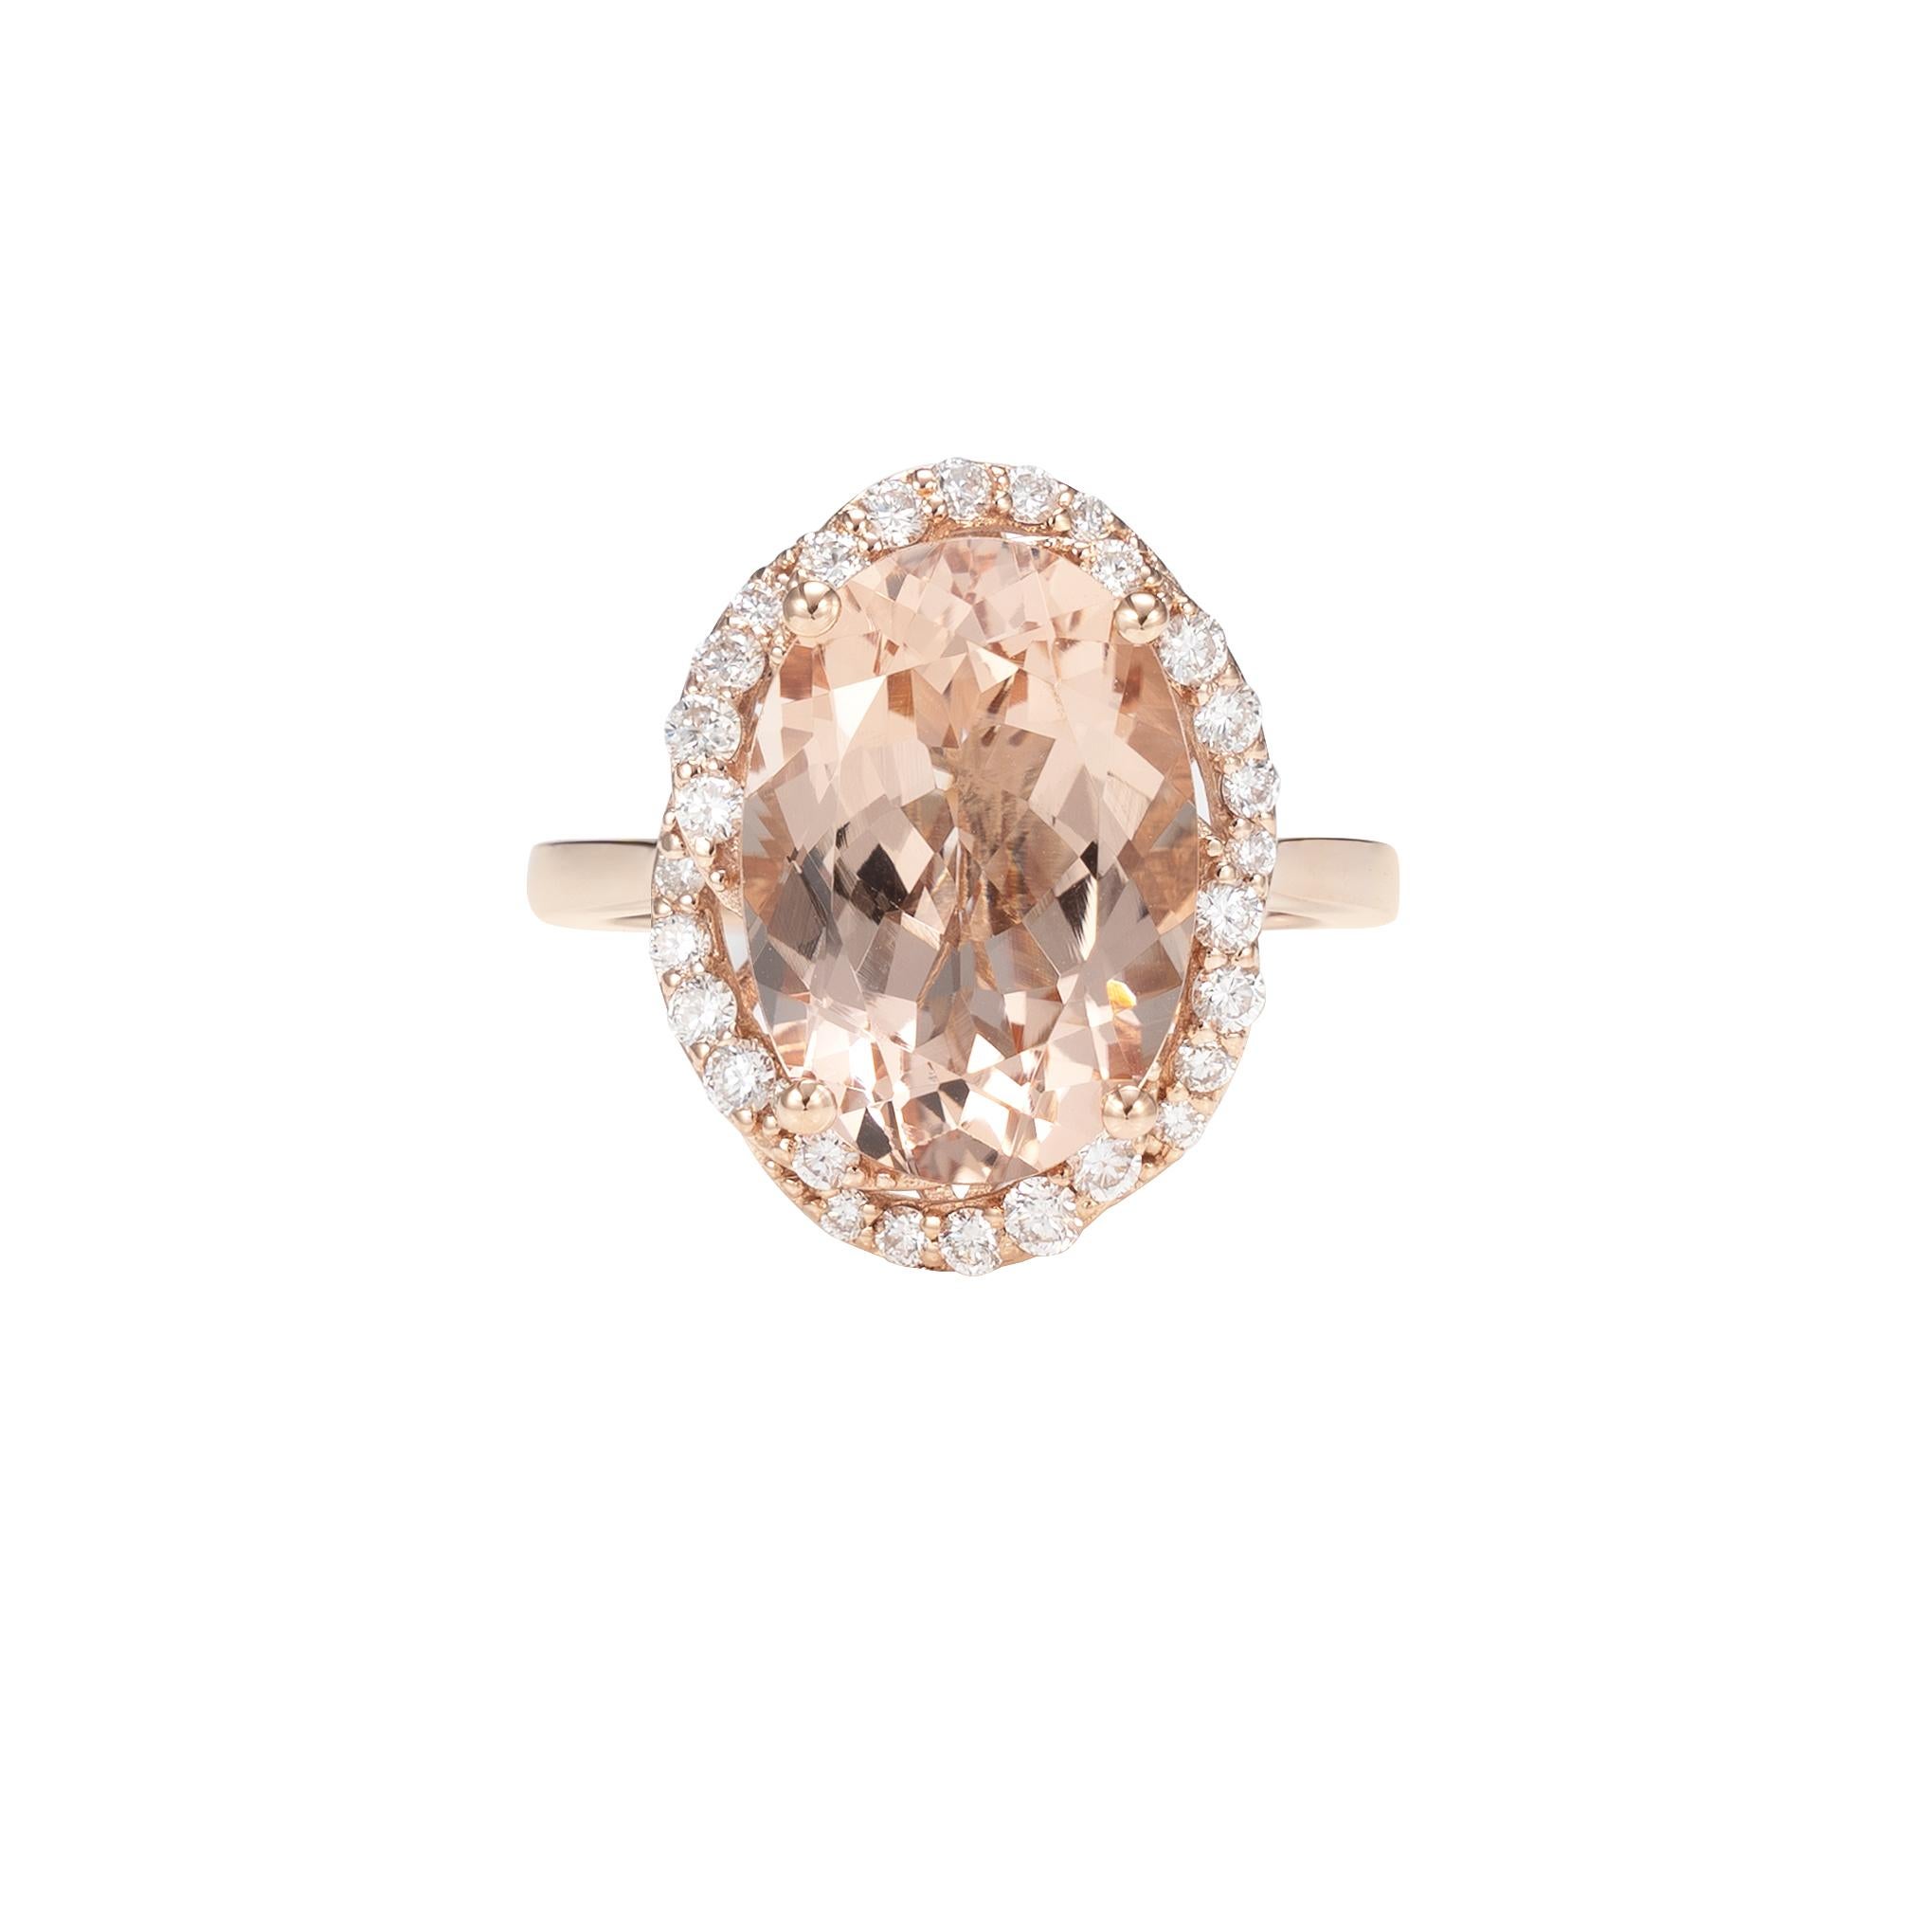 Oval Cut 5.7 Carat Morganite and Diamond Ring in 18 Karat Rose Gold For Sale